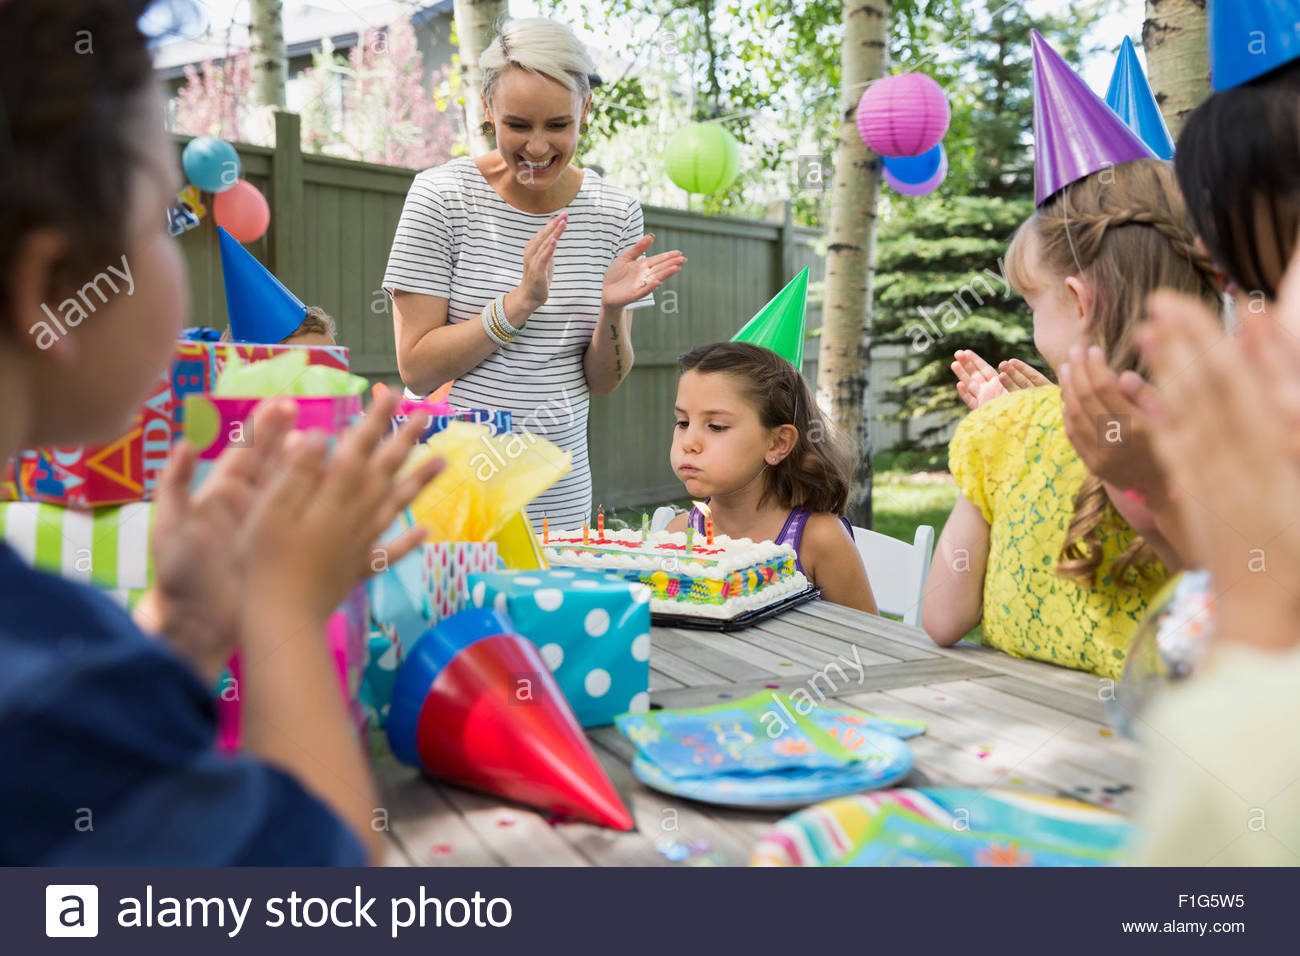 Mother kids clapping for birthday girl blowing candles Stock Photo